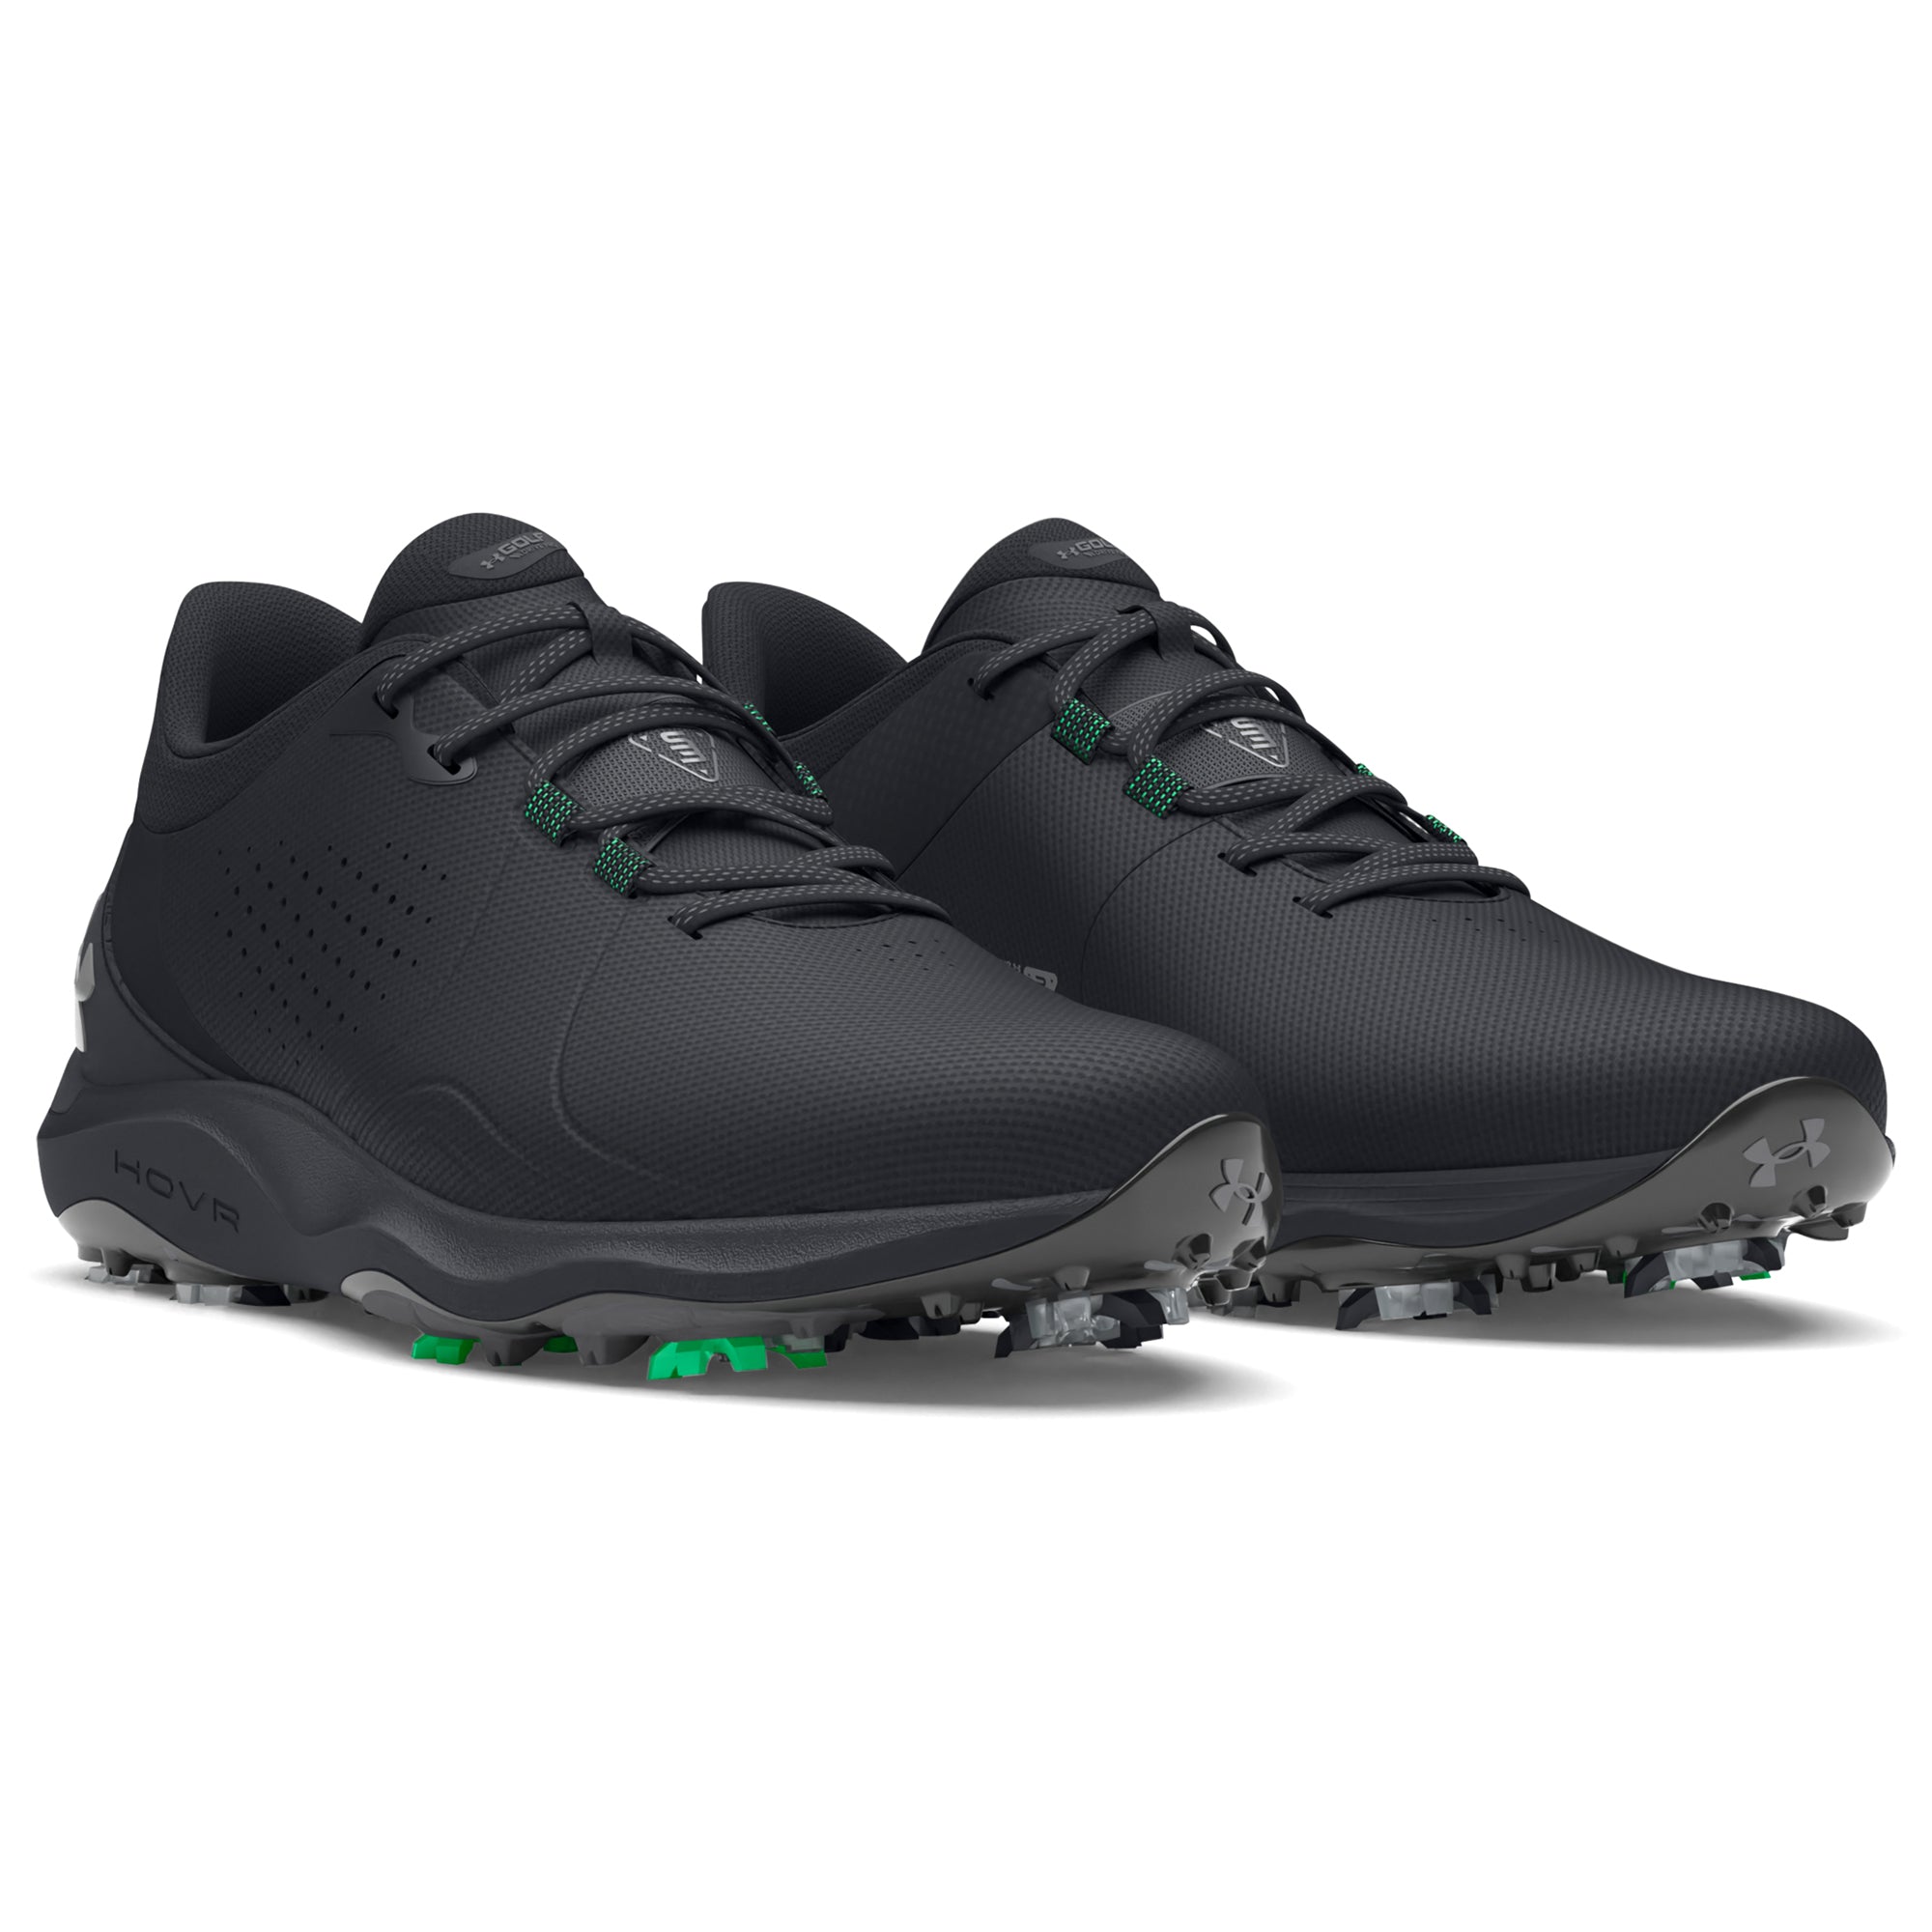 under-armour-drive-pro-wide-golf-shoes-3026919-001